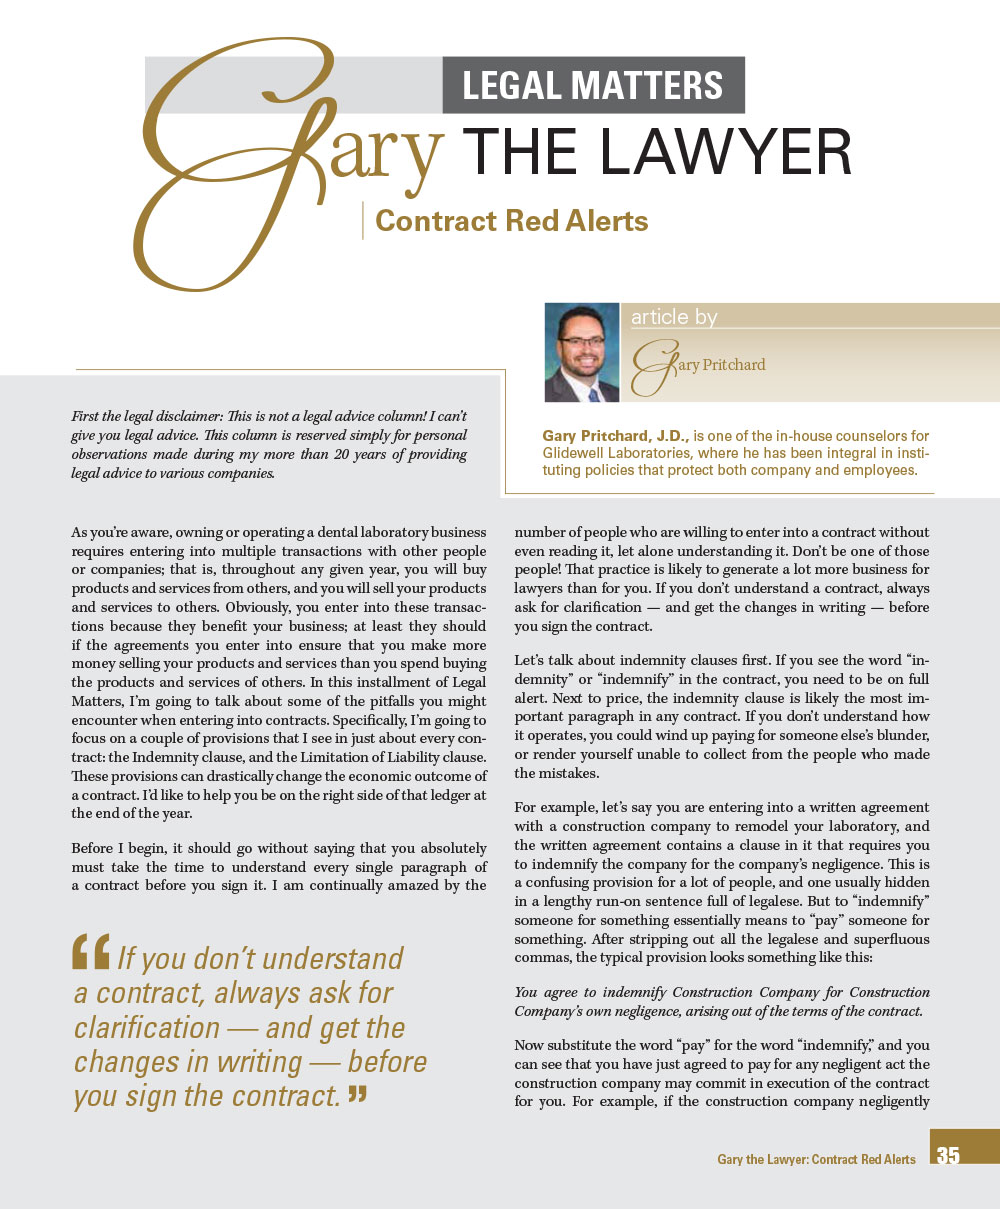 Legal Matters: Gary the Lawyer - Contract Red Alerts